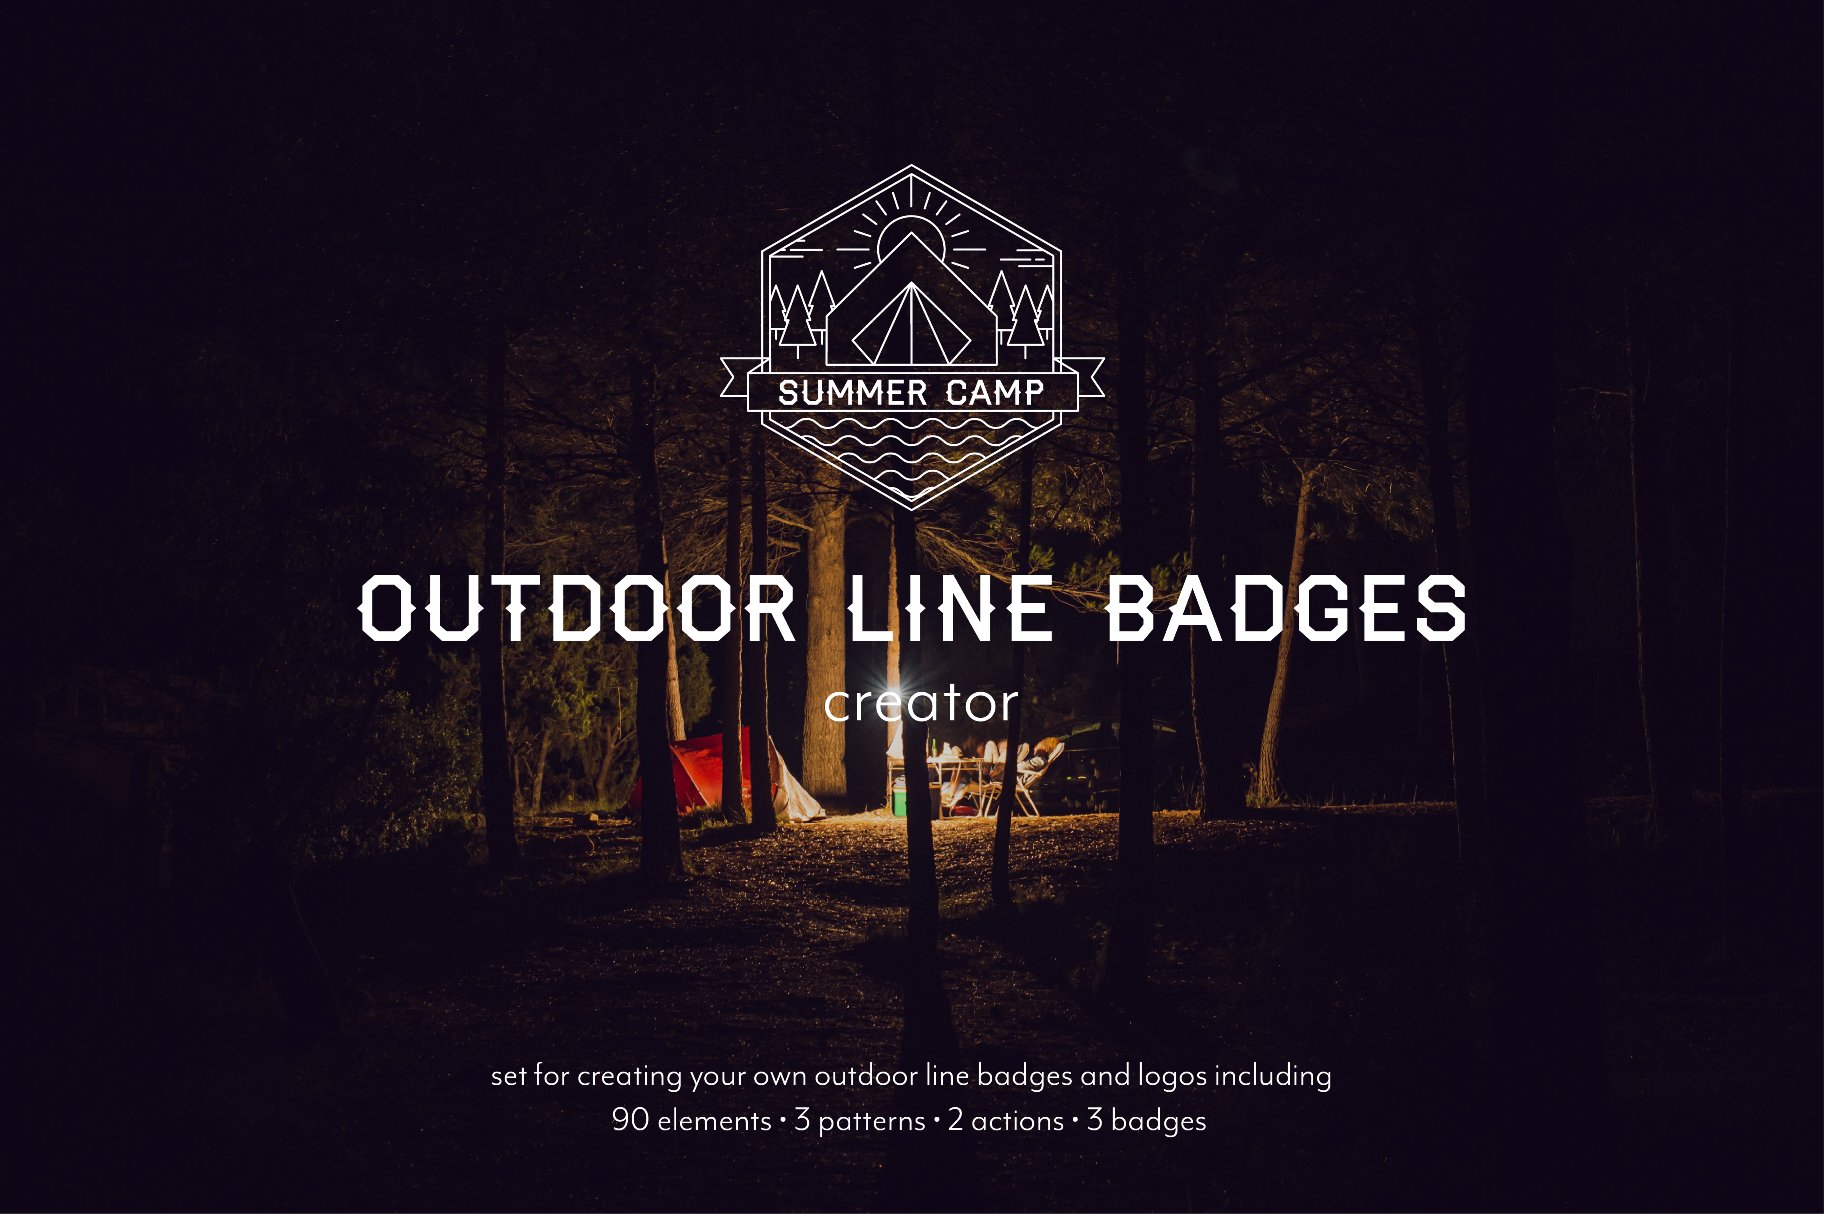 Outdoor Line Badges Creatorcover image.